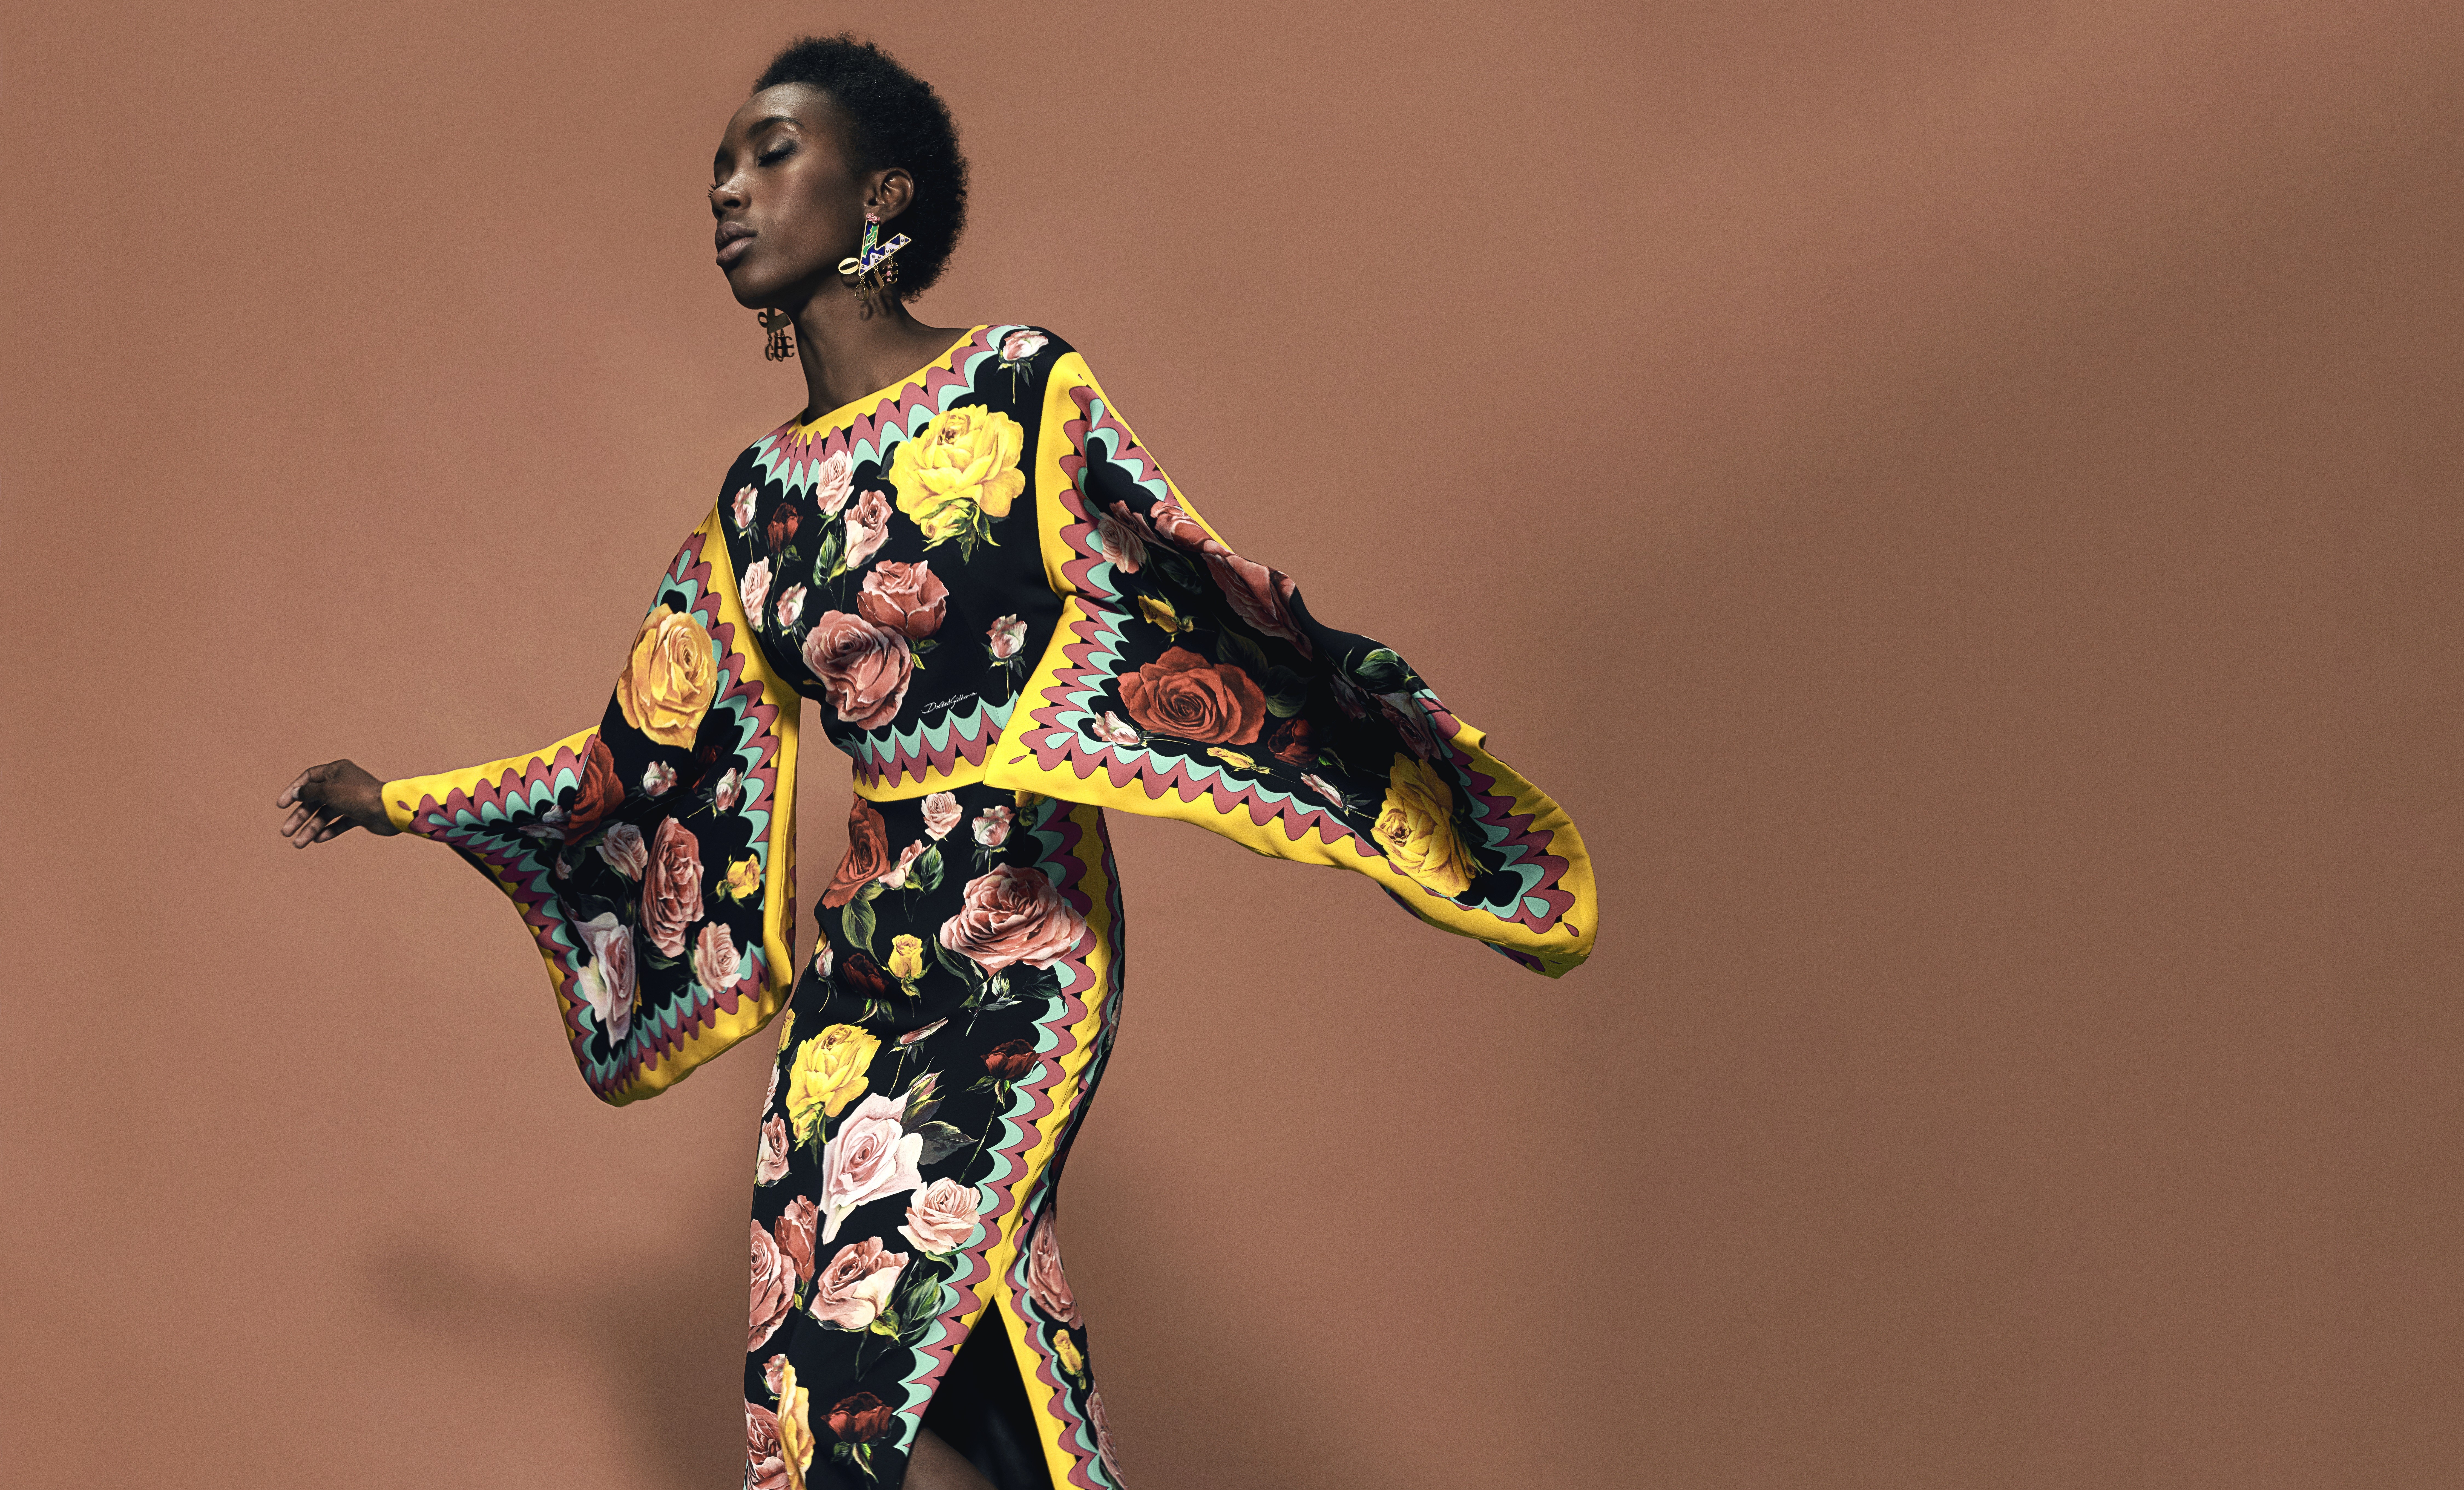 Go big on colour, print and pattern to stay cool in the warmest months